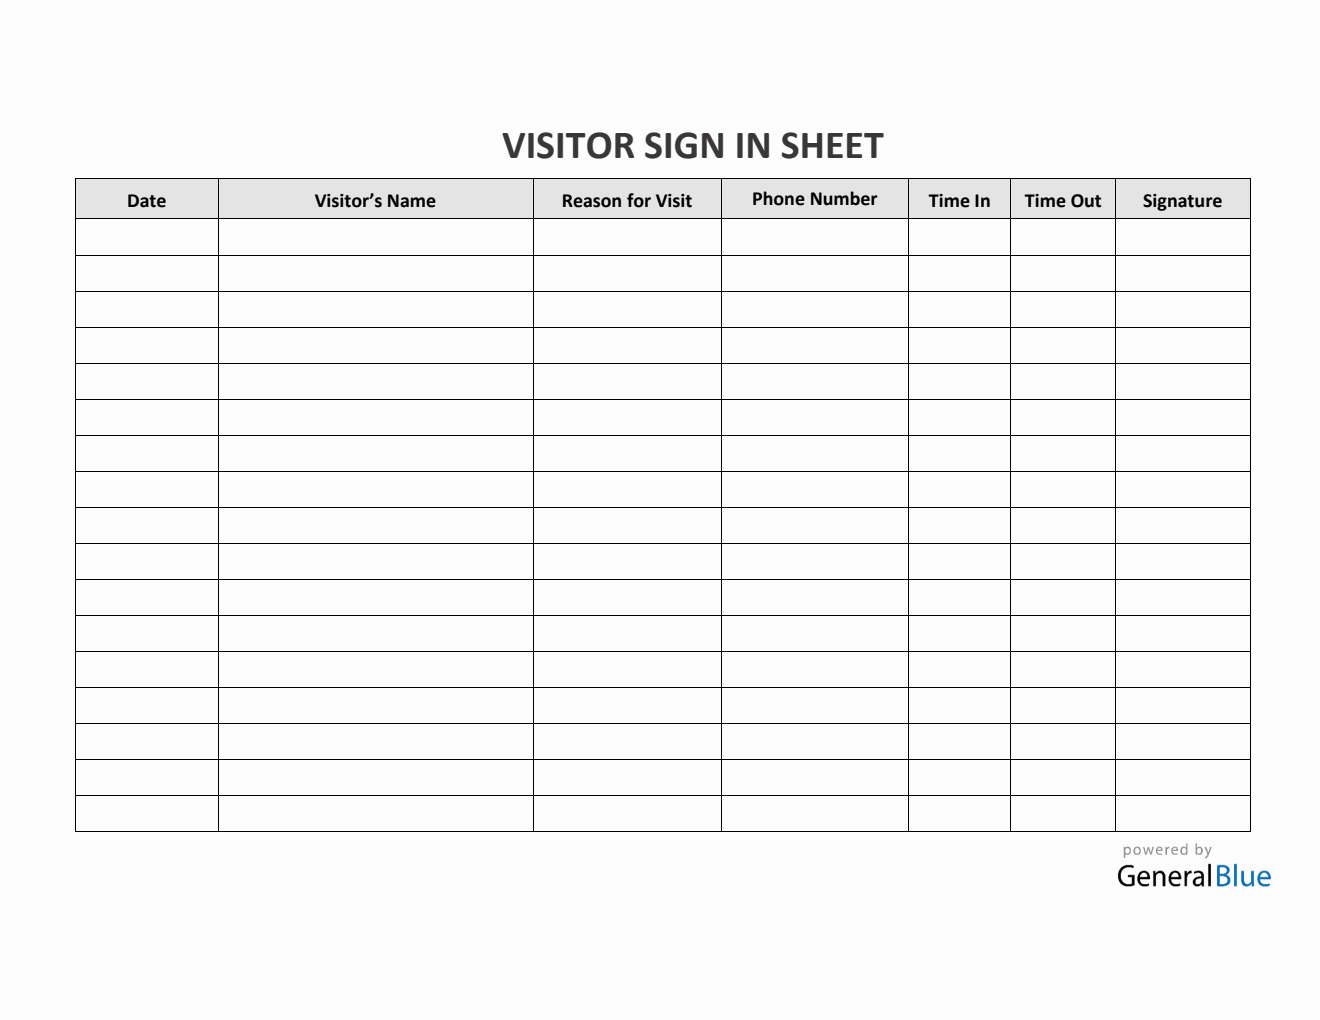 Visitor Sign In Sheet in PDF